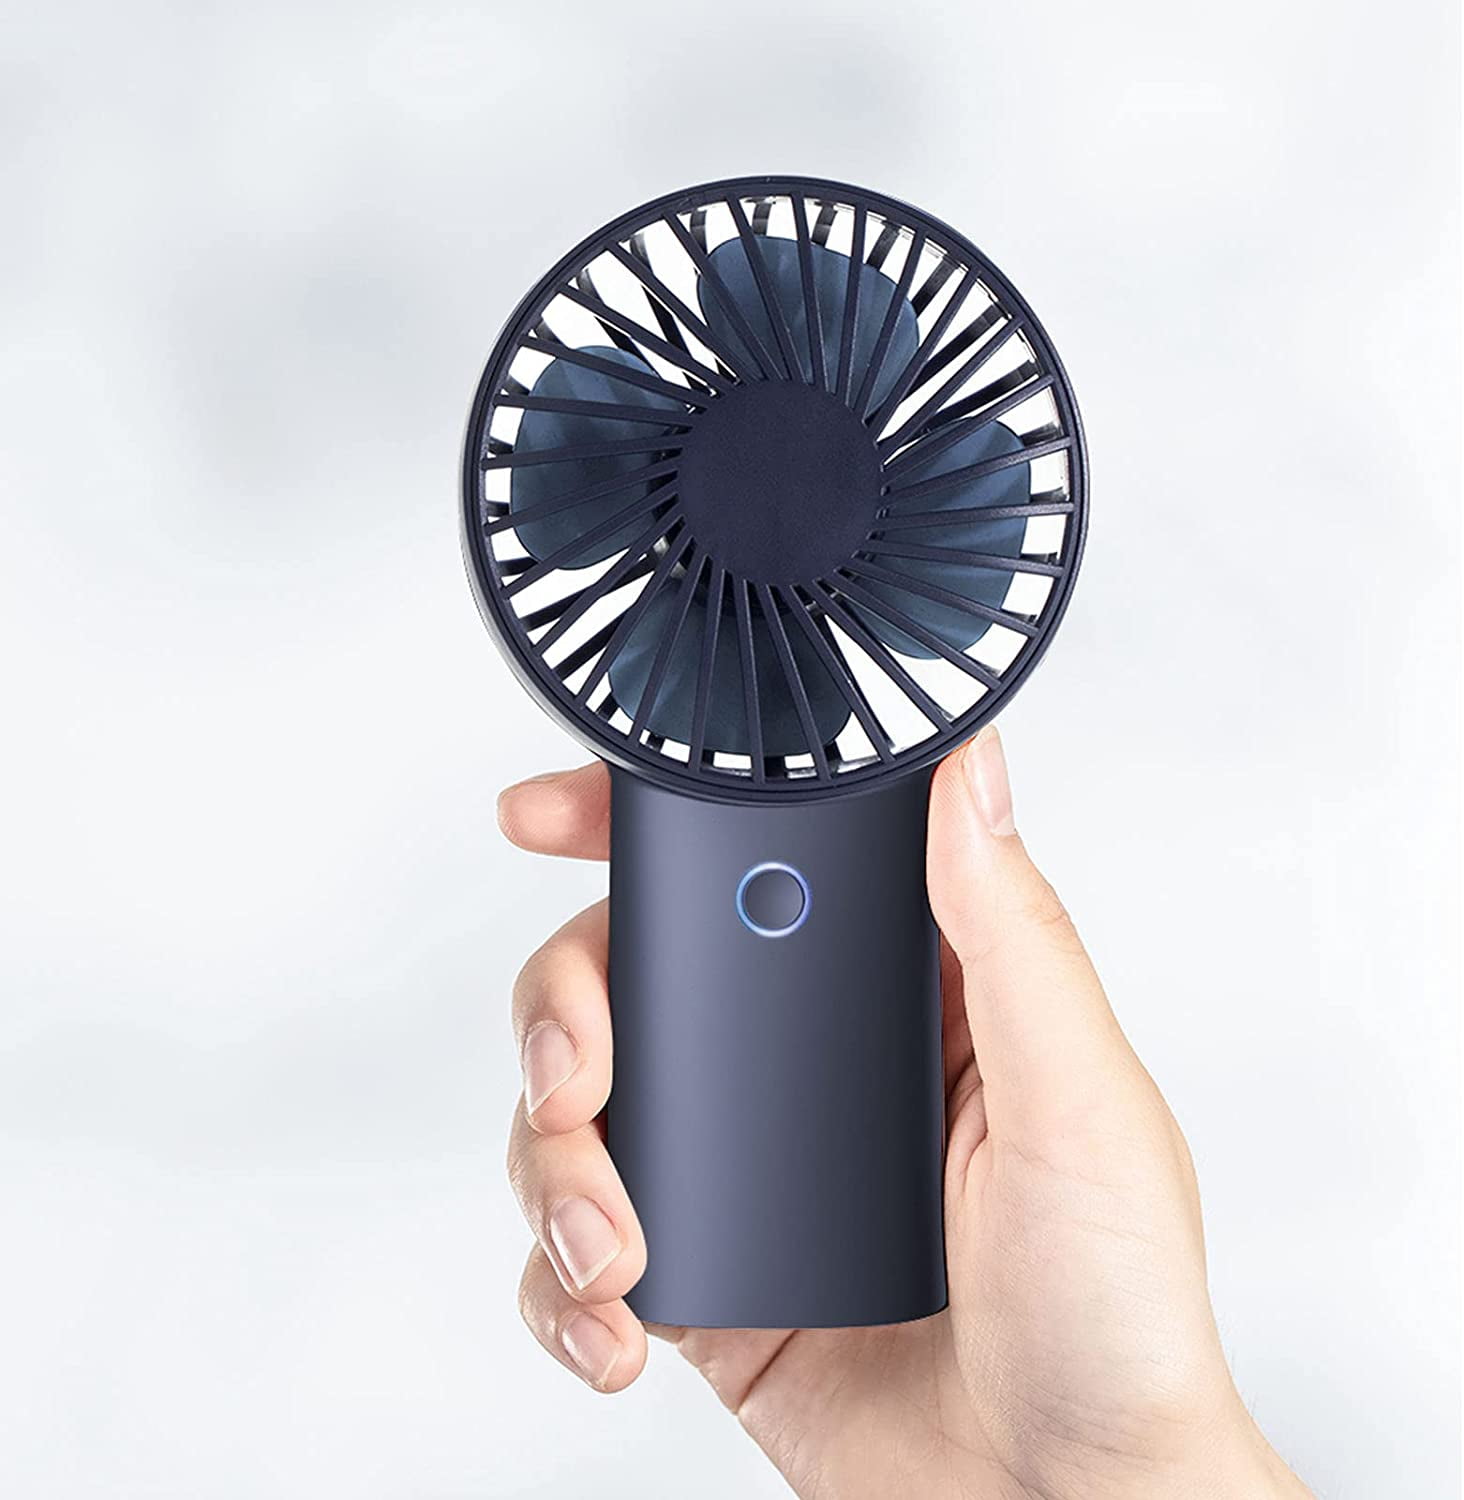 Blue Handheld Portable Table Mini Travel Hand Fan LED Function USB Foldable Multipurpose Desktop Table Fans with Rechargeable/Non Rechargeable 2 in 1 With 3 Speeds for Outdoor Home Office and Travel